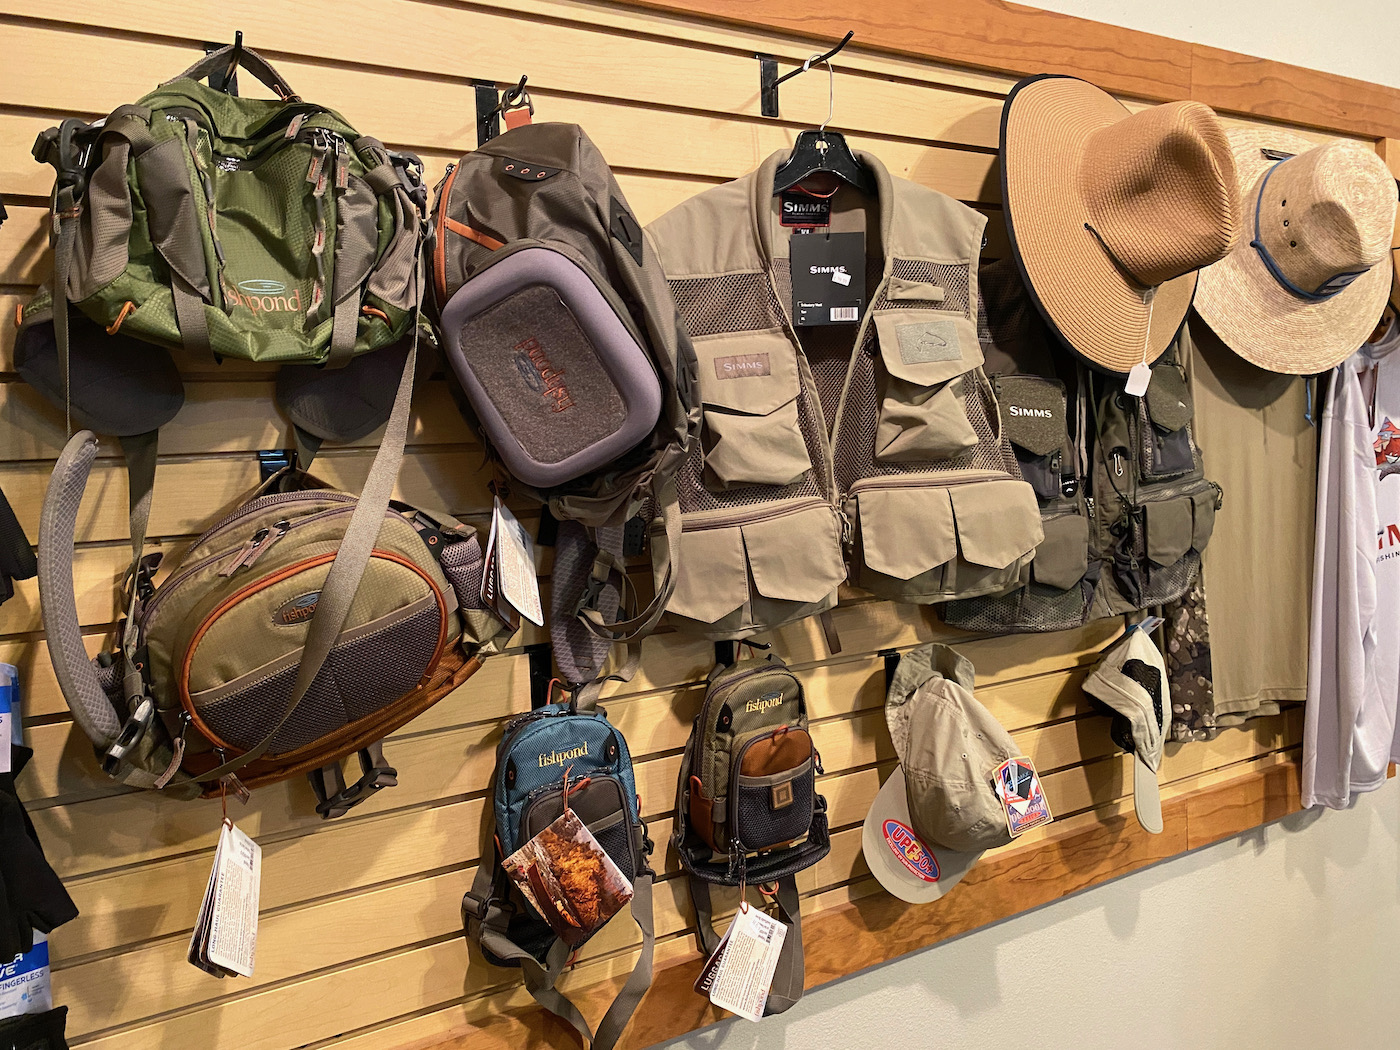 Fly fishing packs and hats in a fly fishing shop